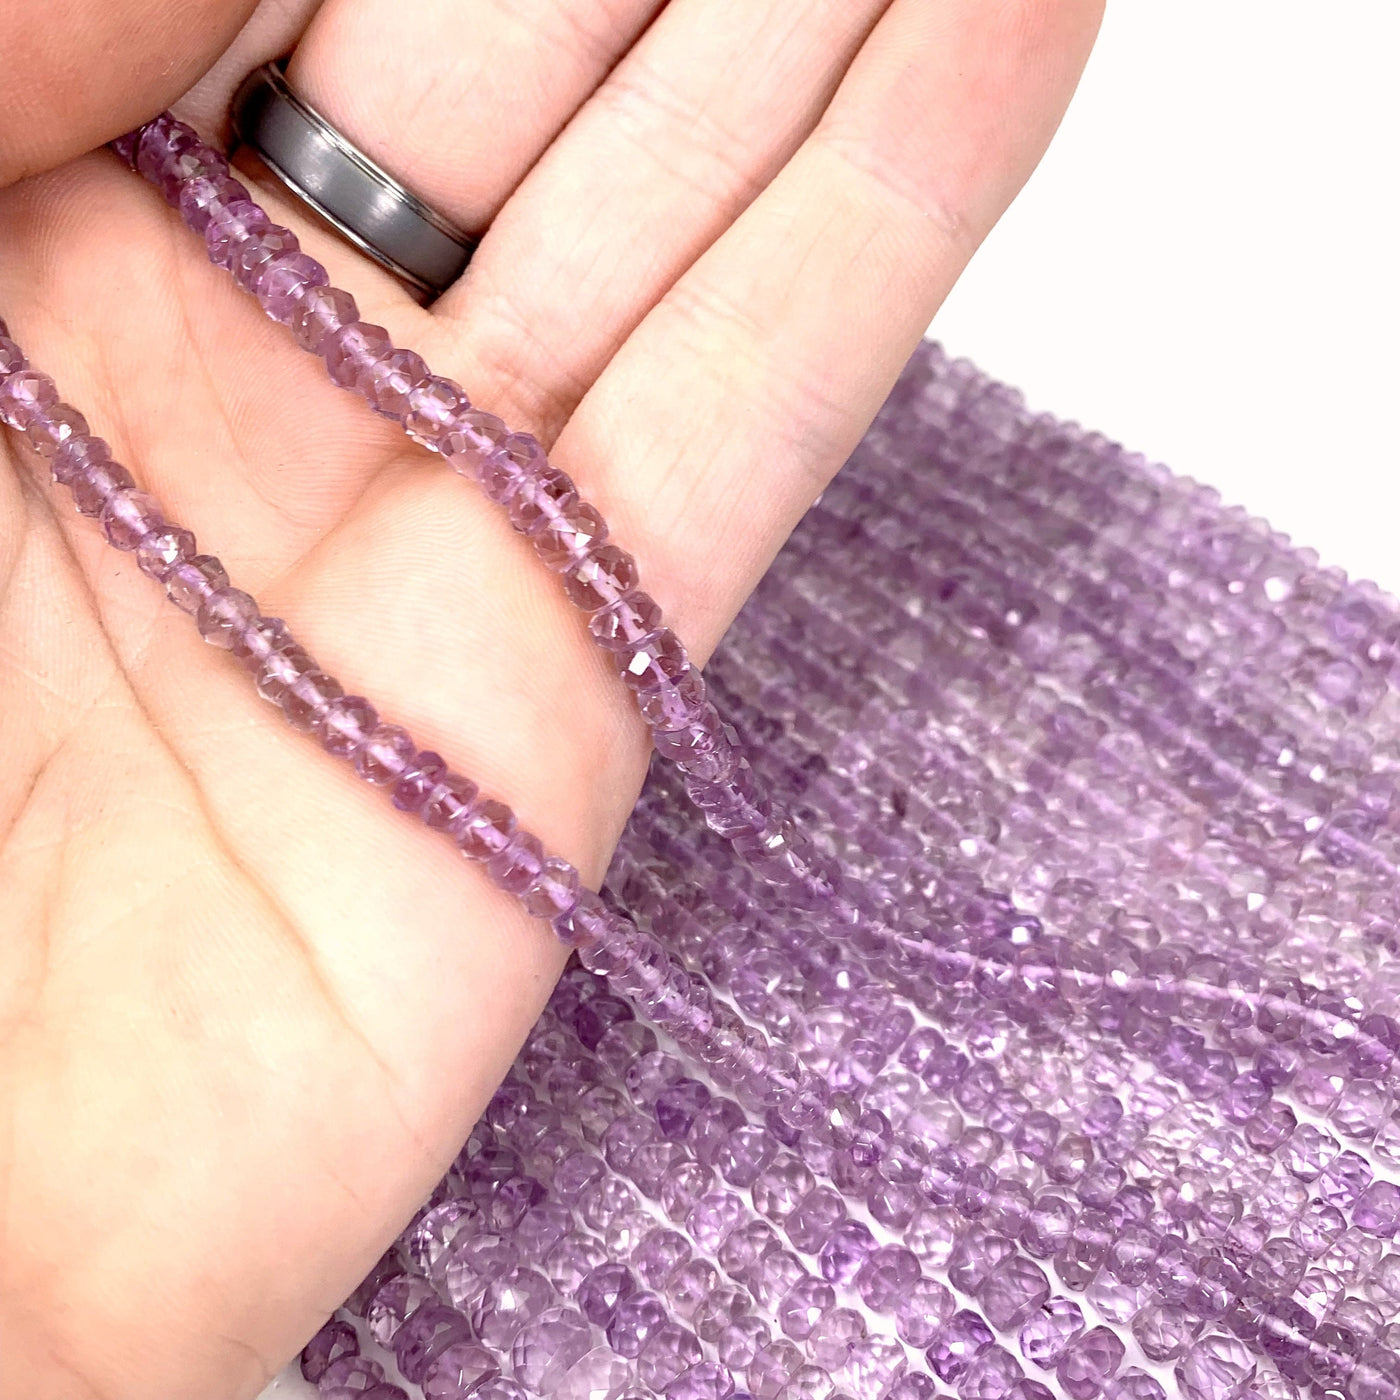 both amethyst bead strands in hand ( left small, right large) with more amethyst beads in the background on a white background